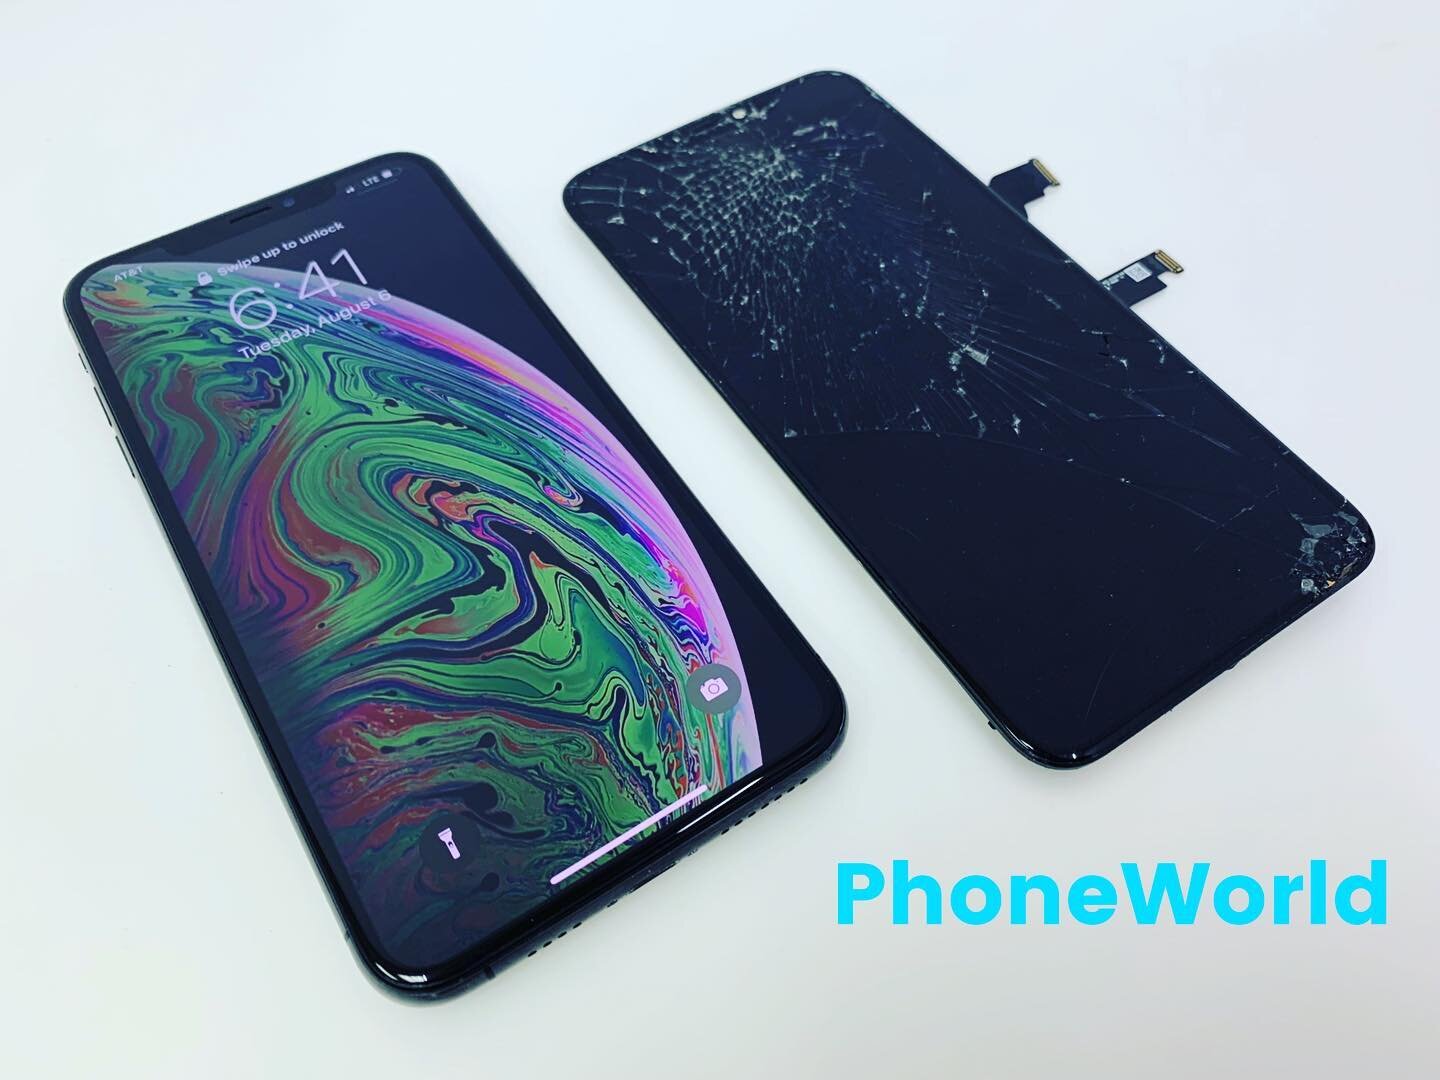 Just another Xs Max from today. 
Give us a call to get yours fixed today!

#cellphonerepairatl #phoneworld #phoneworldtucker #apple #applescreenrepair #xsmaxscreenrepair #fastfix